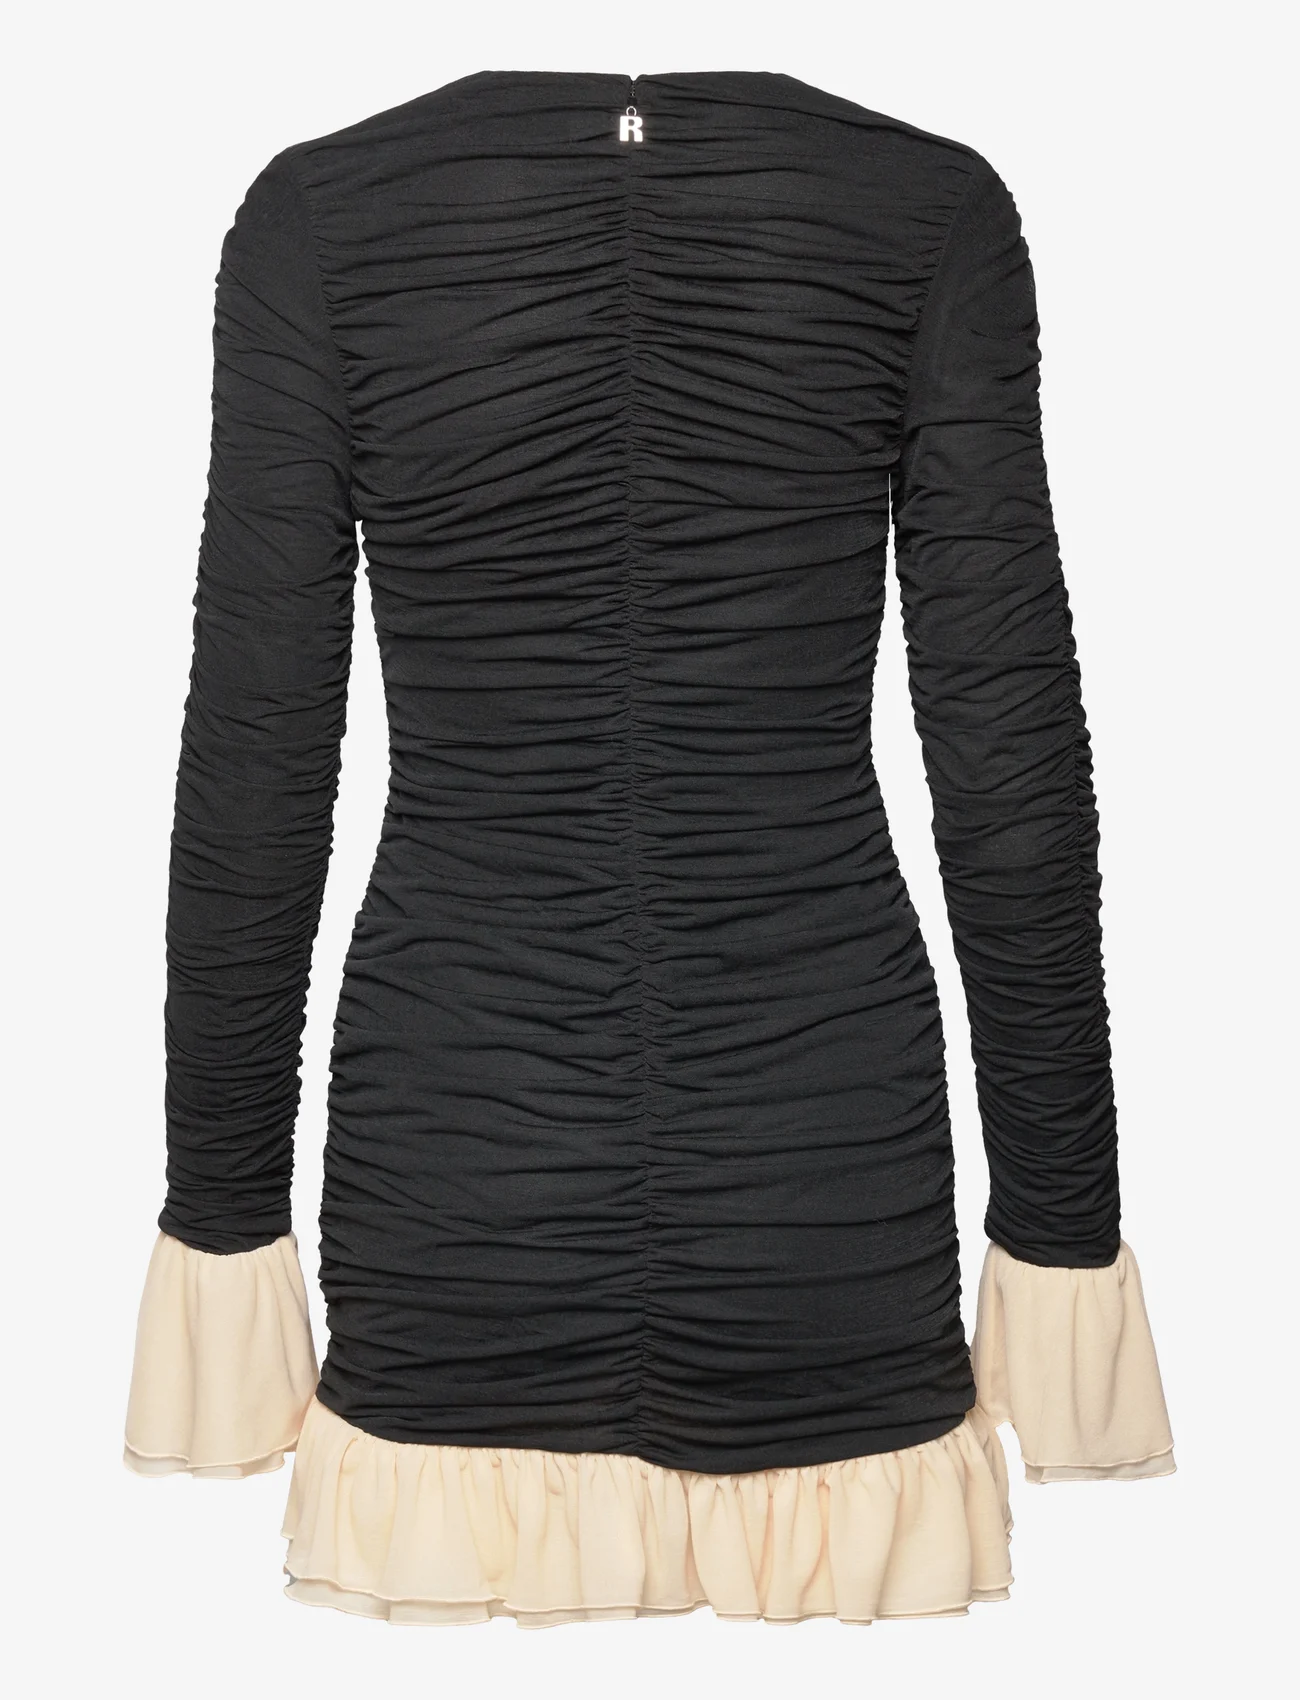 ROTATE Birger Christensen - Mini Ruched Ls Dress - peoriided outlet-hindadega - 1000 black comb. - 1